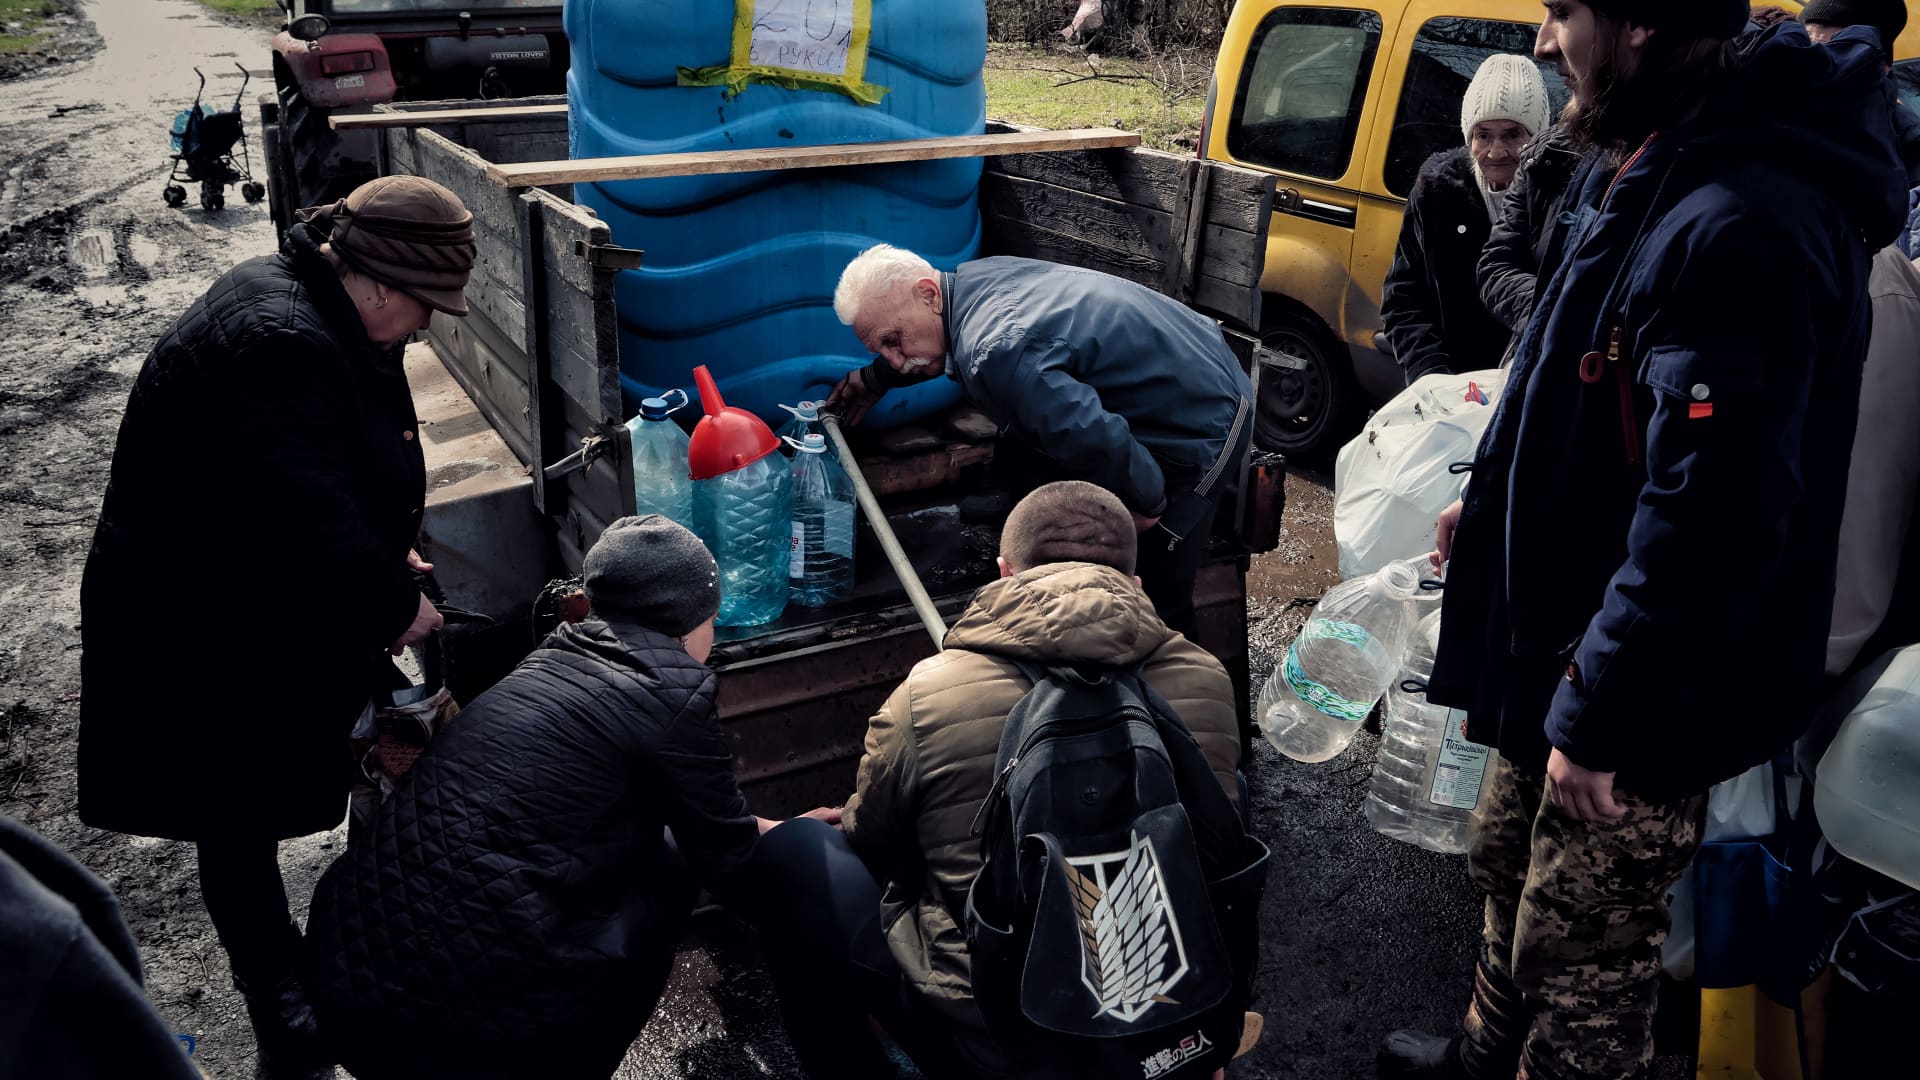 Local residents stand in line for drinking water brought by volunteers on April 7, 2023 in Donetsk Oblast, Ukraine. Despite the constant shelling, there are still civilians in the frontline cities, who sometimes have to bring humanitarian aid with the help of military equipment. (Photo by Yan Dobronosov/Global Images Ukraine via Getty Images)